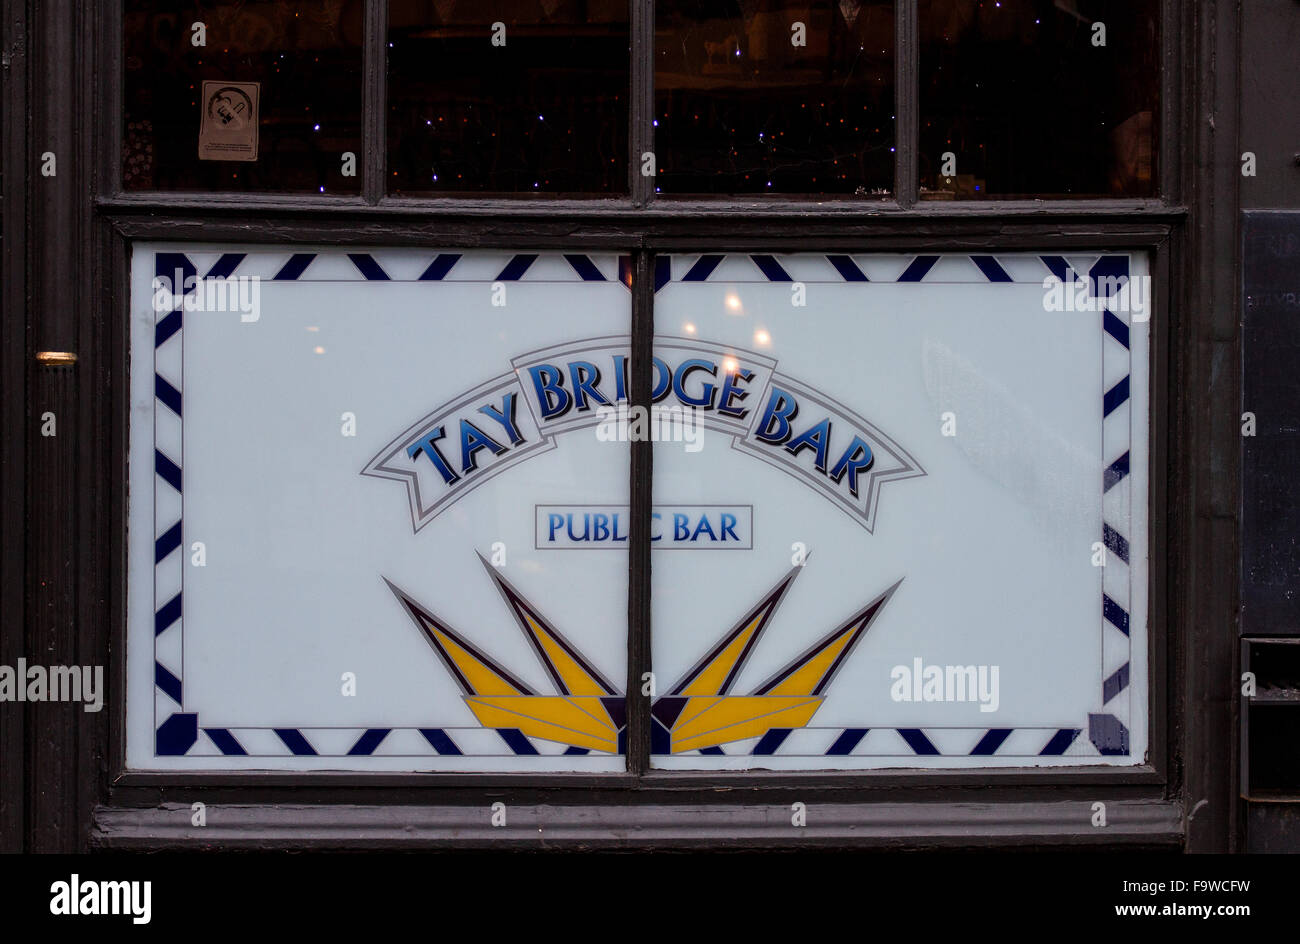 Established in 1867 The Taybridge Bar is a Victorian Scottish Pub along 249 Perth Road in Dundee, UK Stock Photo